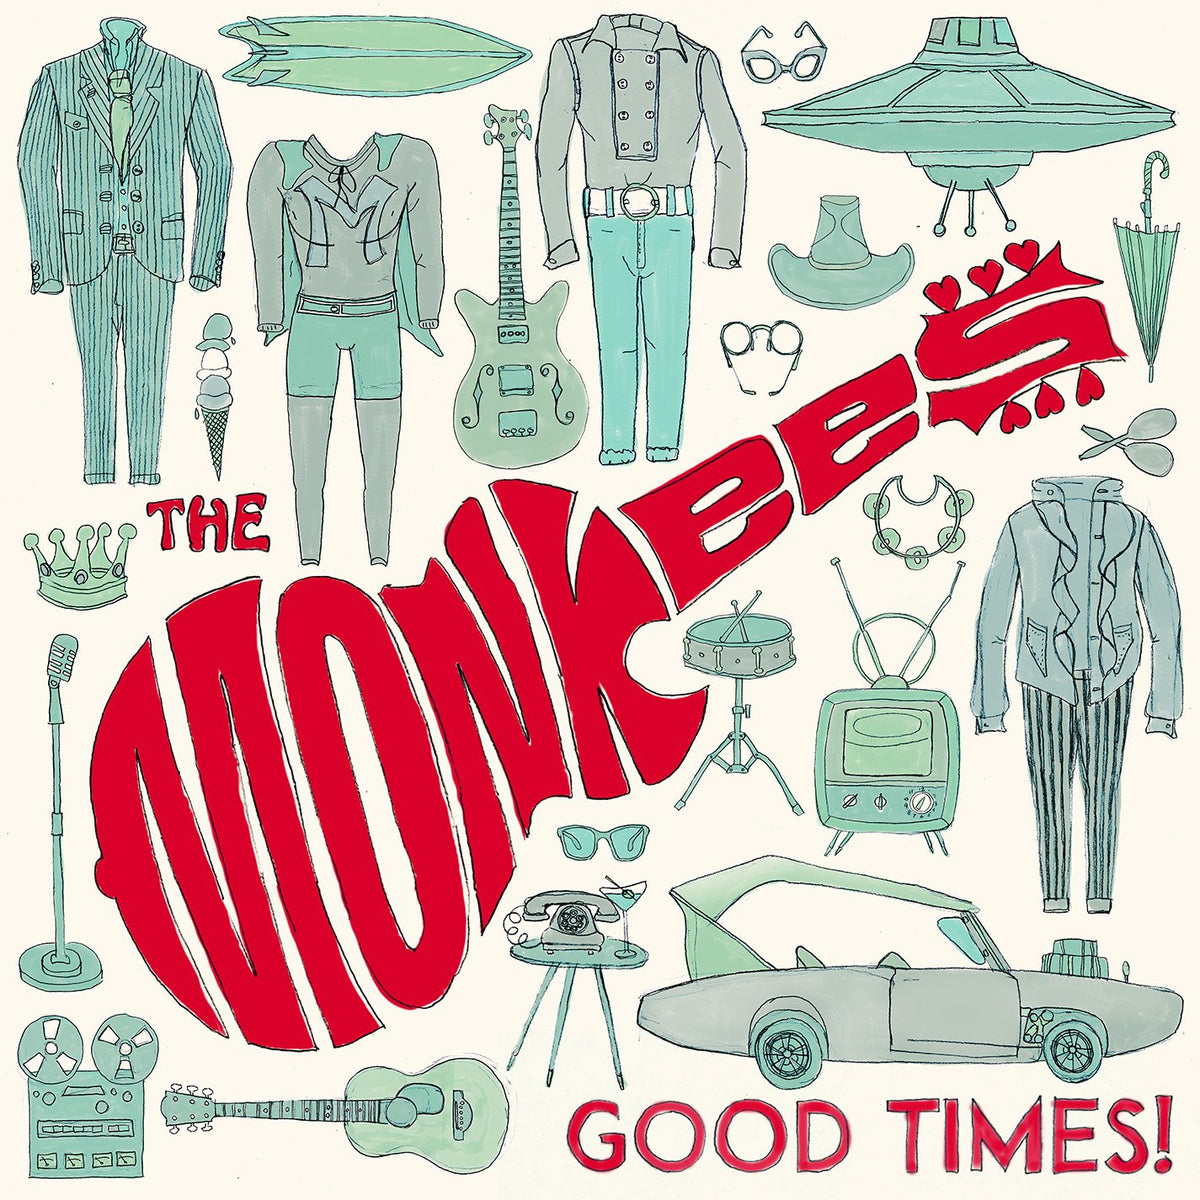 The Monkees - Good Times!